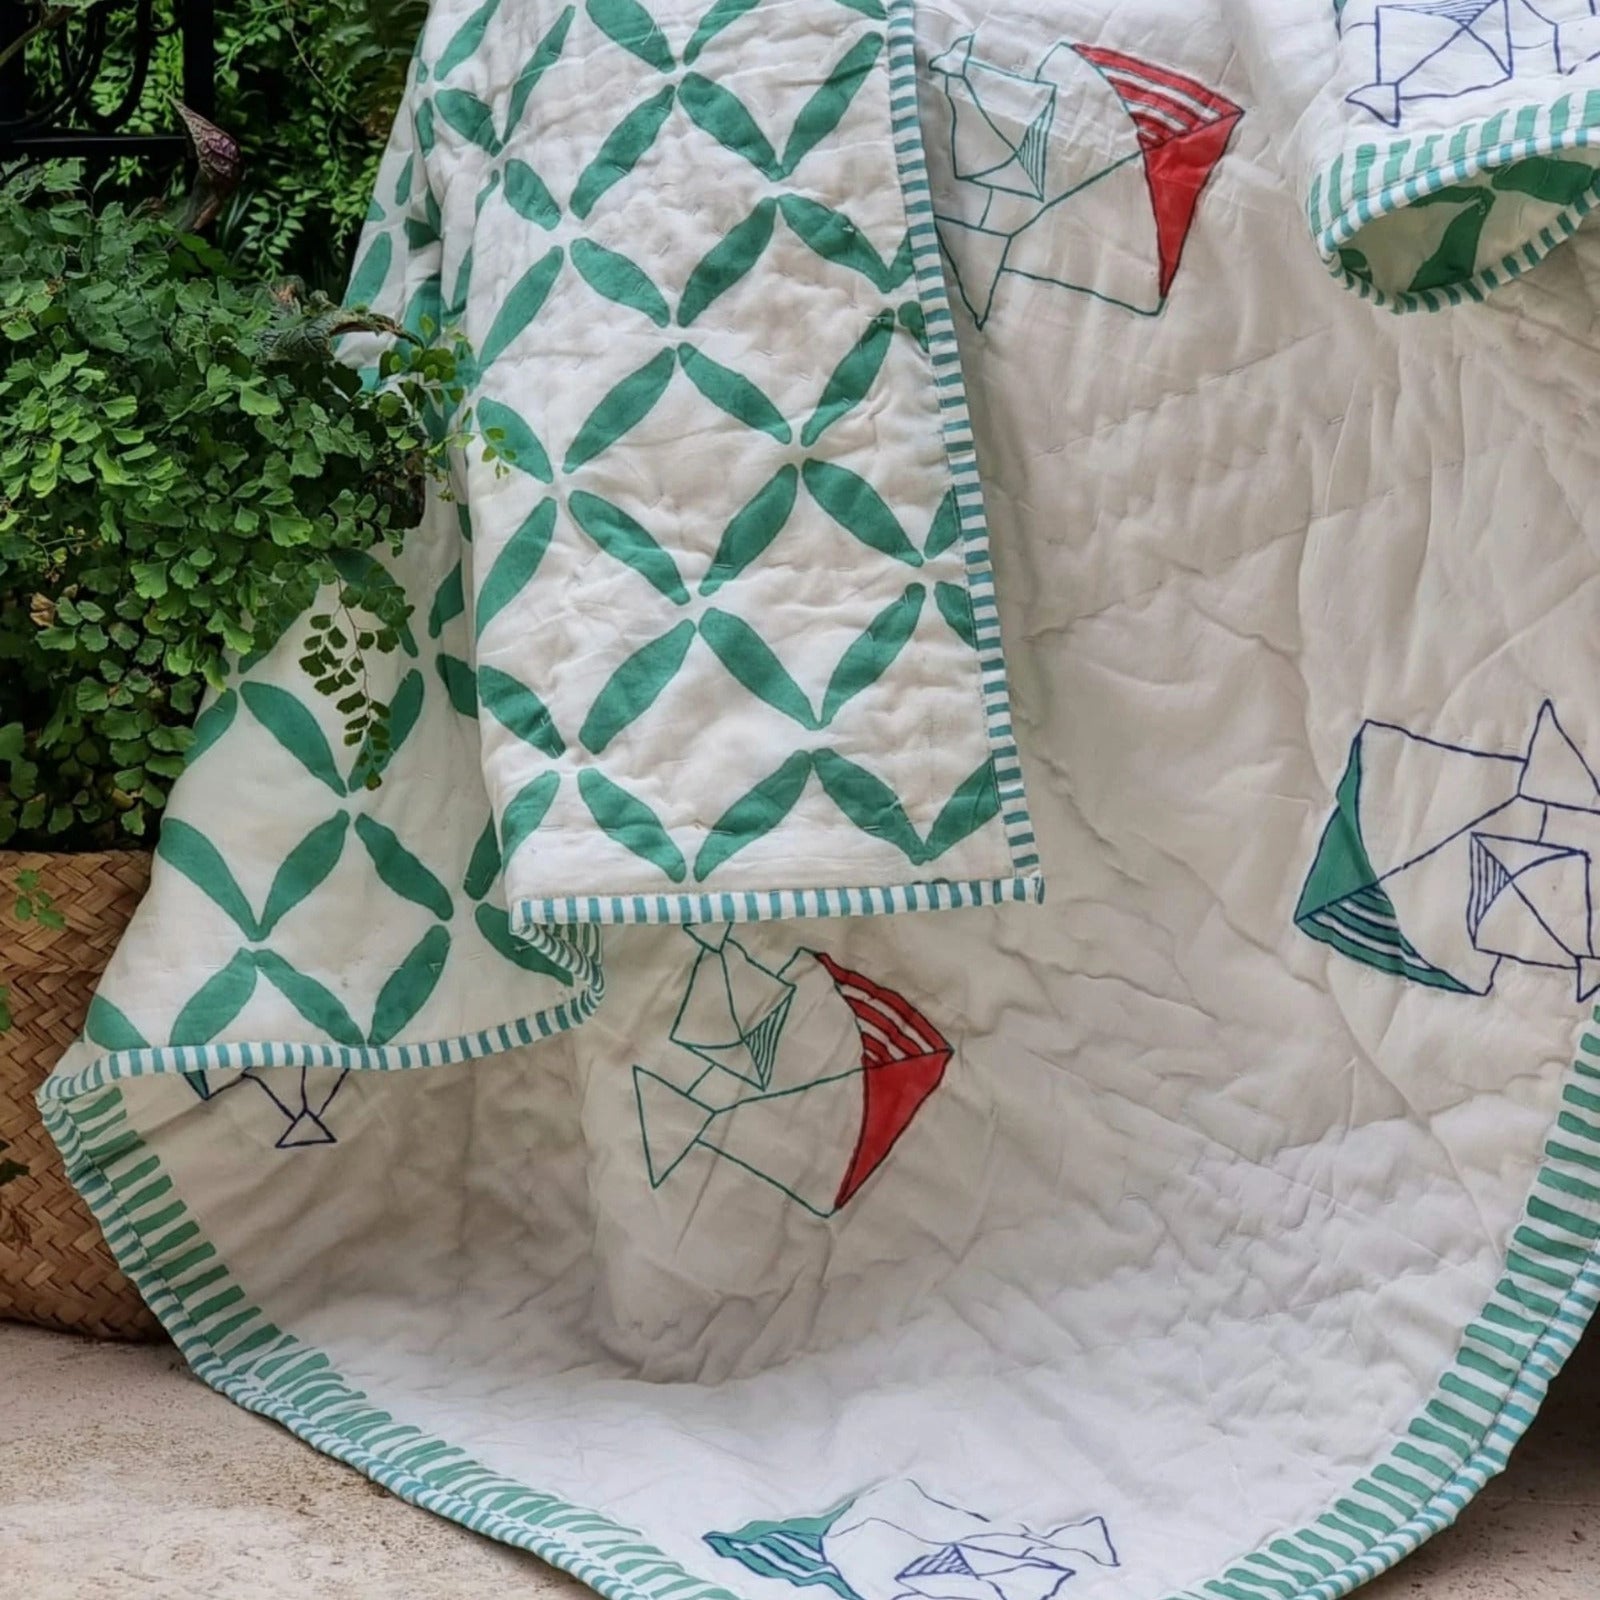 GOTS Certified Organic Cotton Reversible Baby Quilt (100x120cm) - Pretty Kites (Green) - Baby & Kids > Baby & Kids Others - Zanlana Design and Home Decor